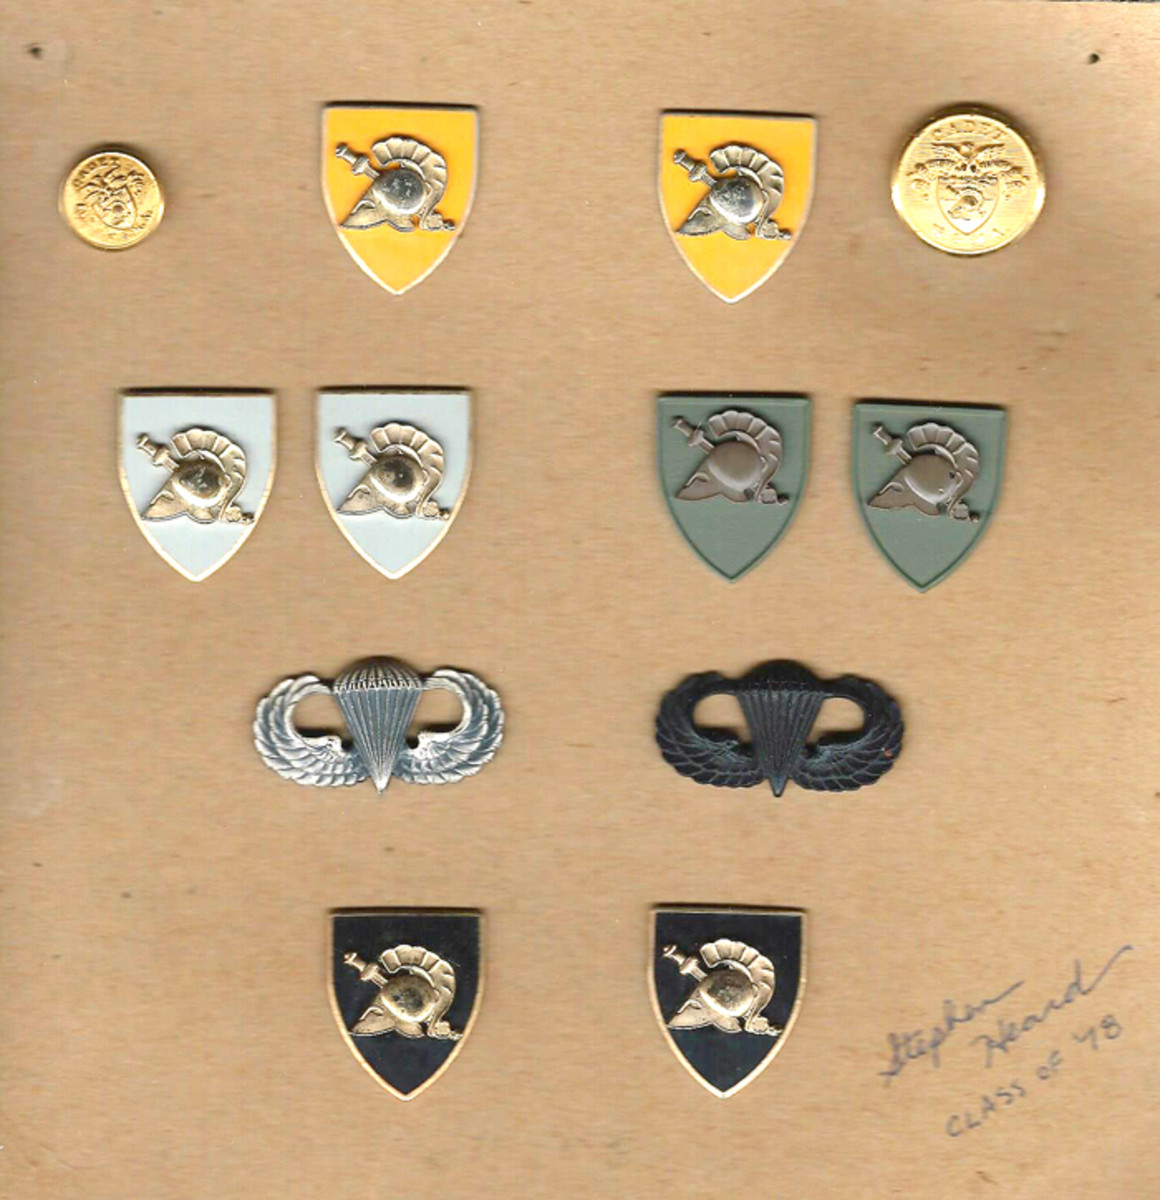 One of Buell’s West Point students gave the instructor his four years of  West Point class pins and jump wings in appreciation of Buell’s teaching skills.